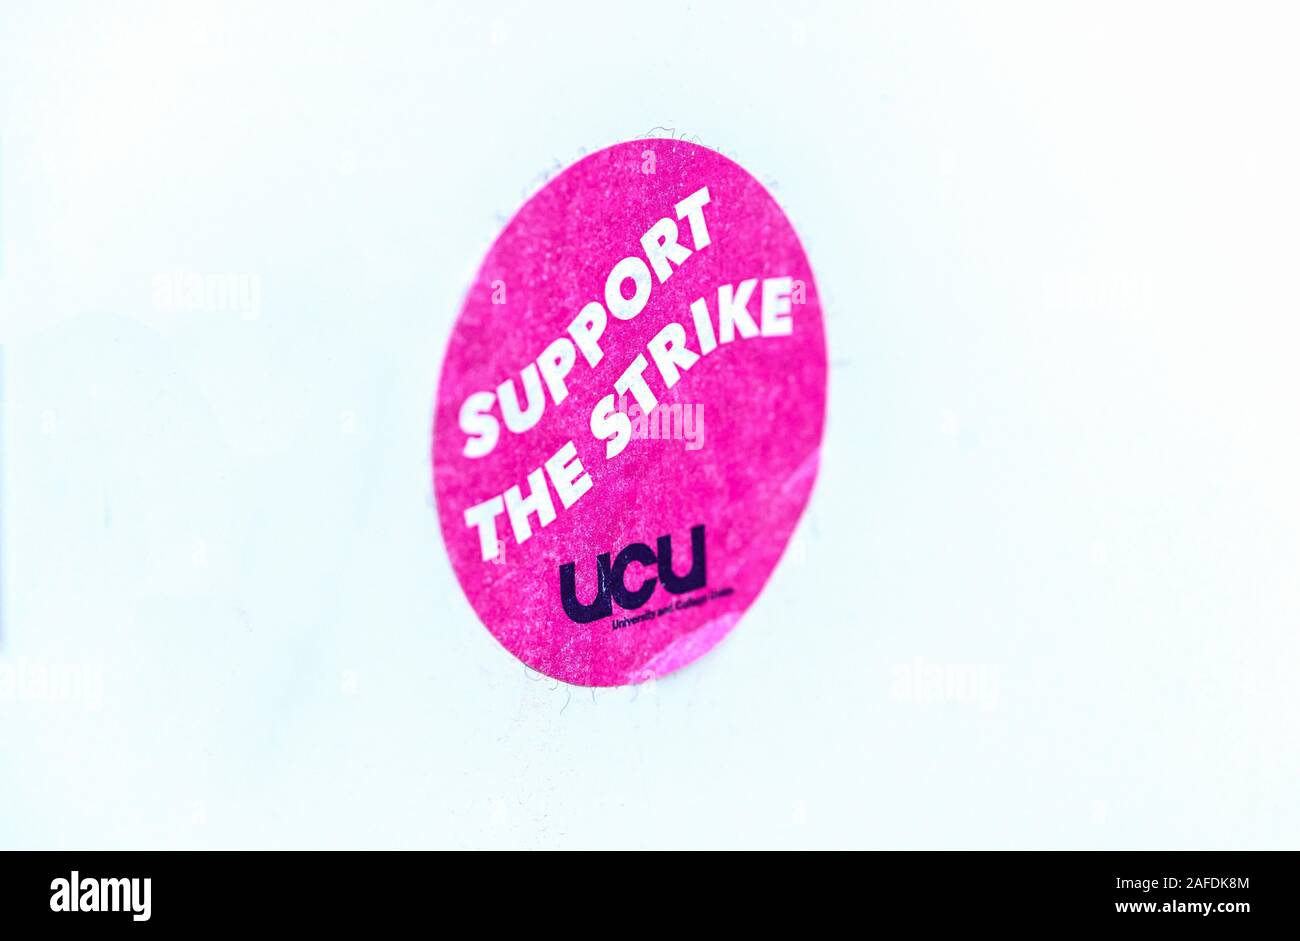 A UCU (University College Union) sticker in support of a strike, England, UK, 2019 Stock Photo